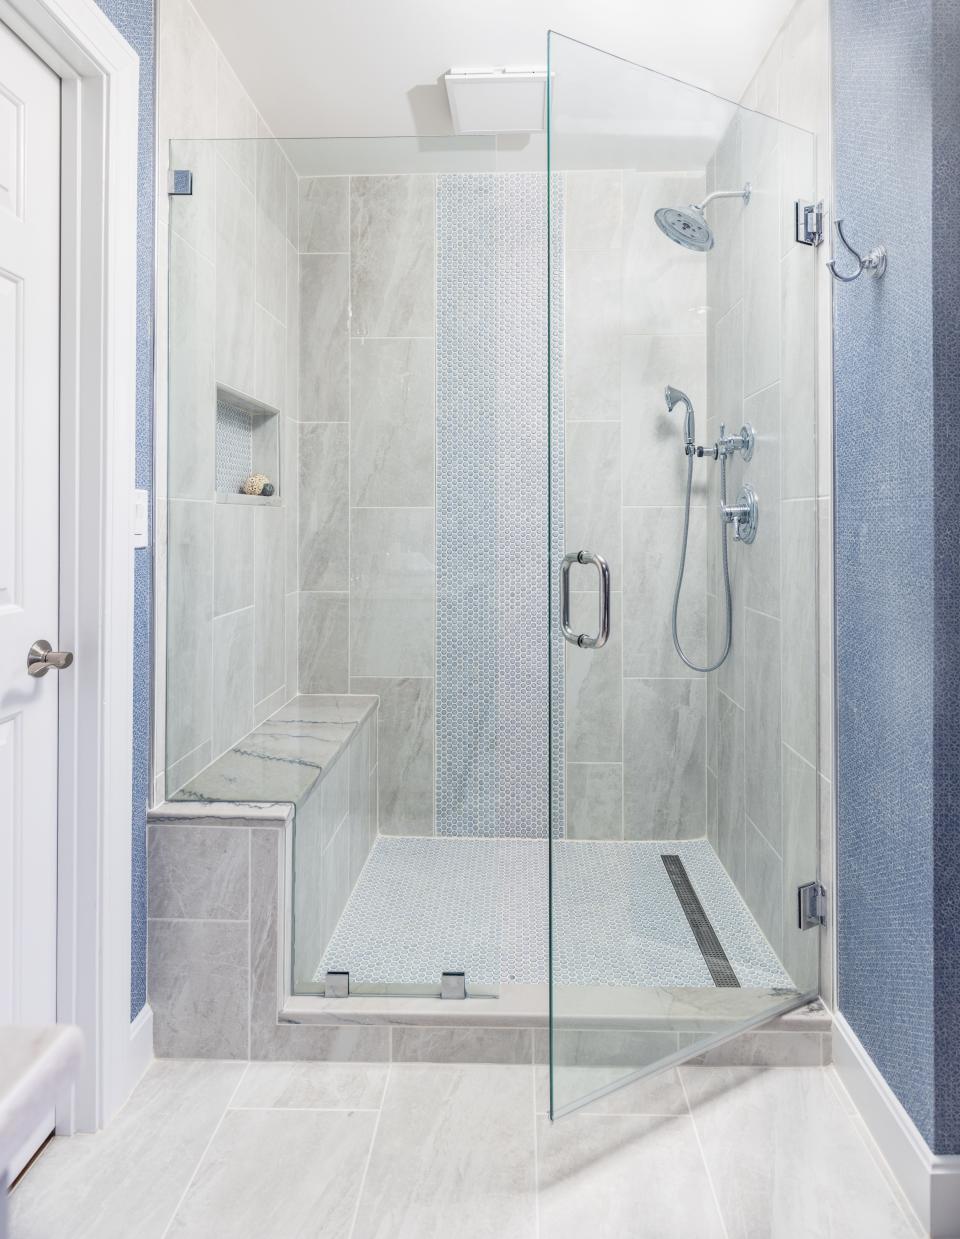 The new, larger shower boasts a built-in shelf as well as a bench seat.